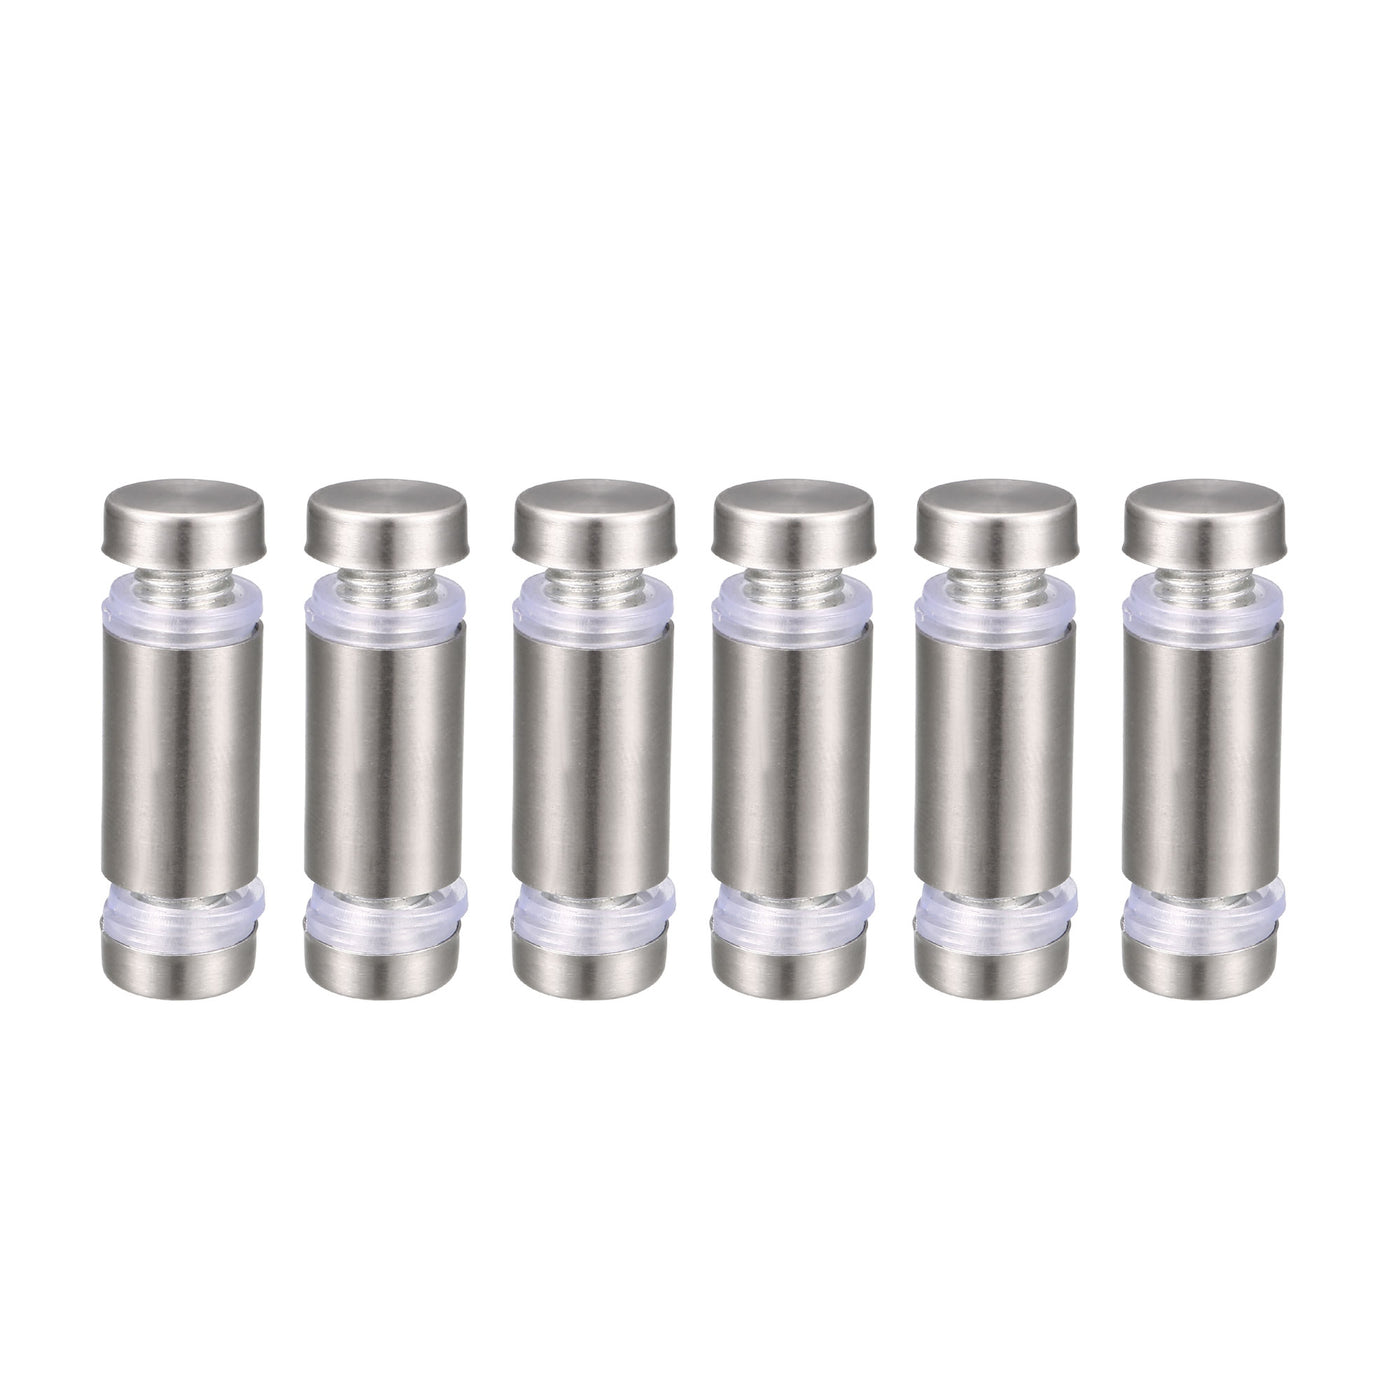 uxcell Uxcell Glass Standoff Double Head Stainless Steel Standoff Holder 12mm x 37mm 6 Pcs